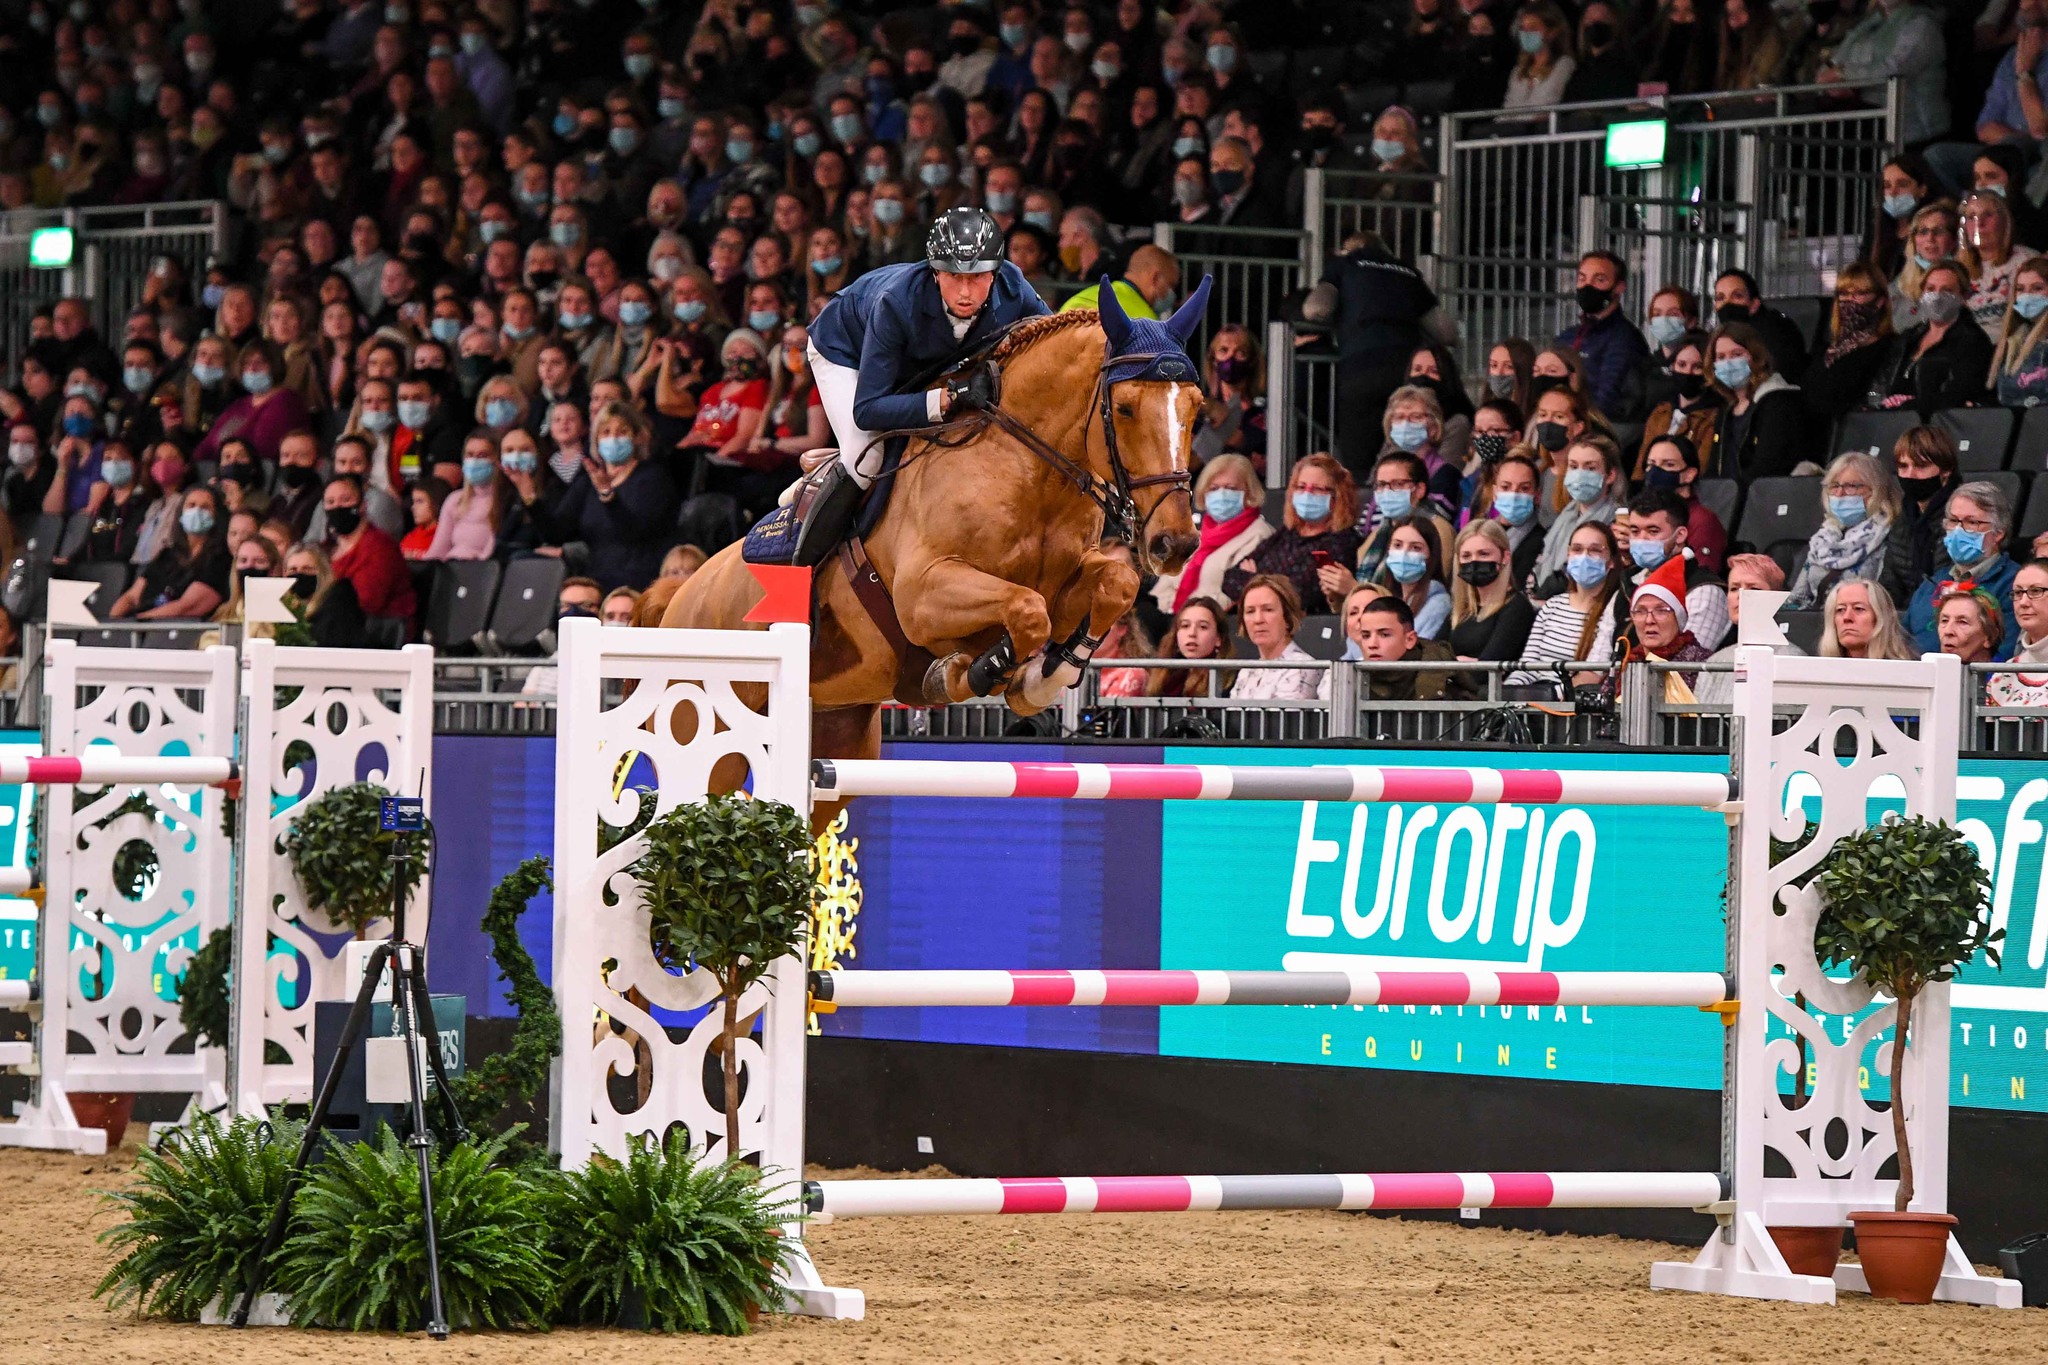 Another day, another win for Martin Fuchs at The London International Horse Show